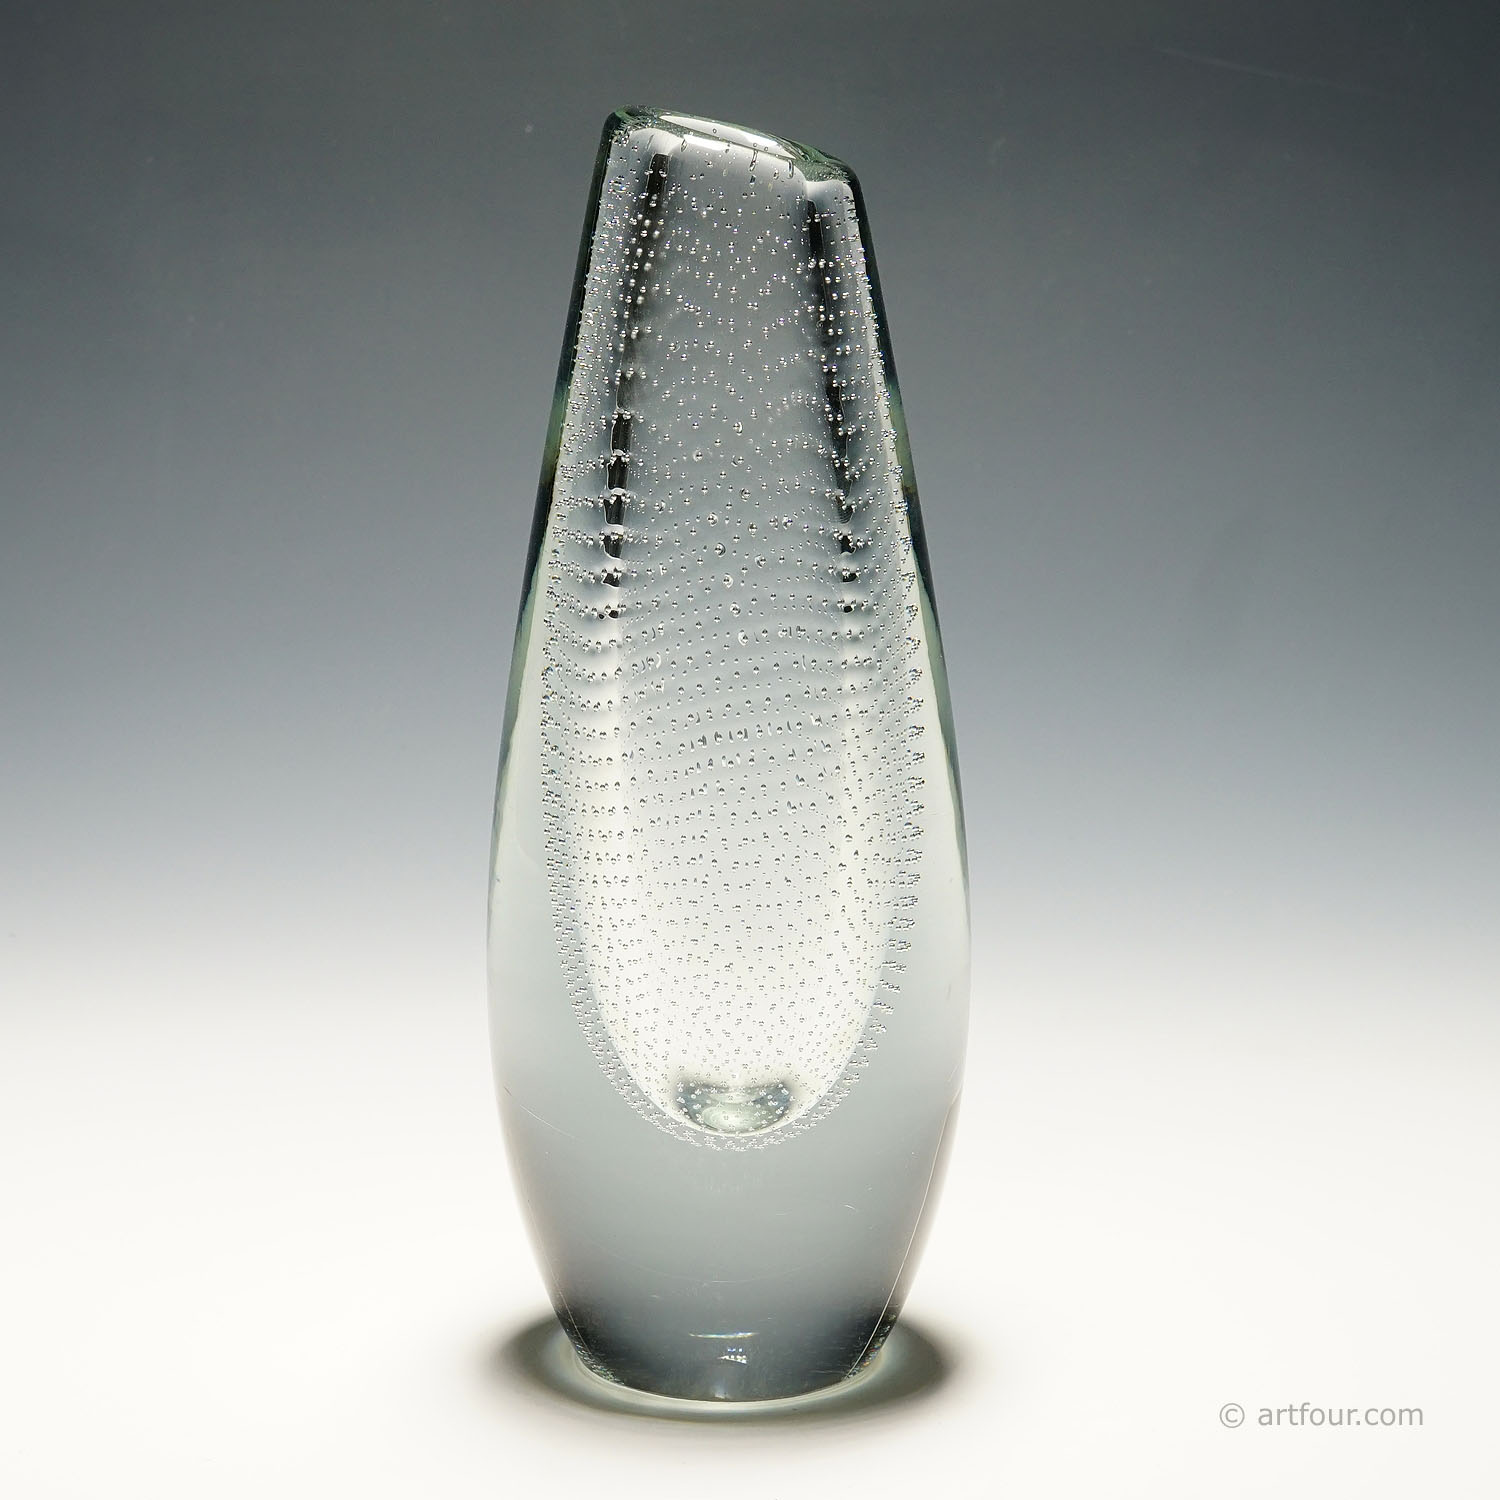 Vintage Art Glass Vase by Gunnel Nyman for Nuutajarvi Notsio in 1959